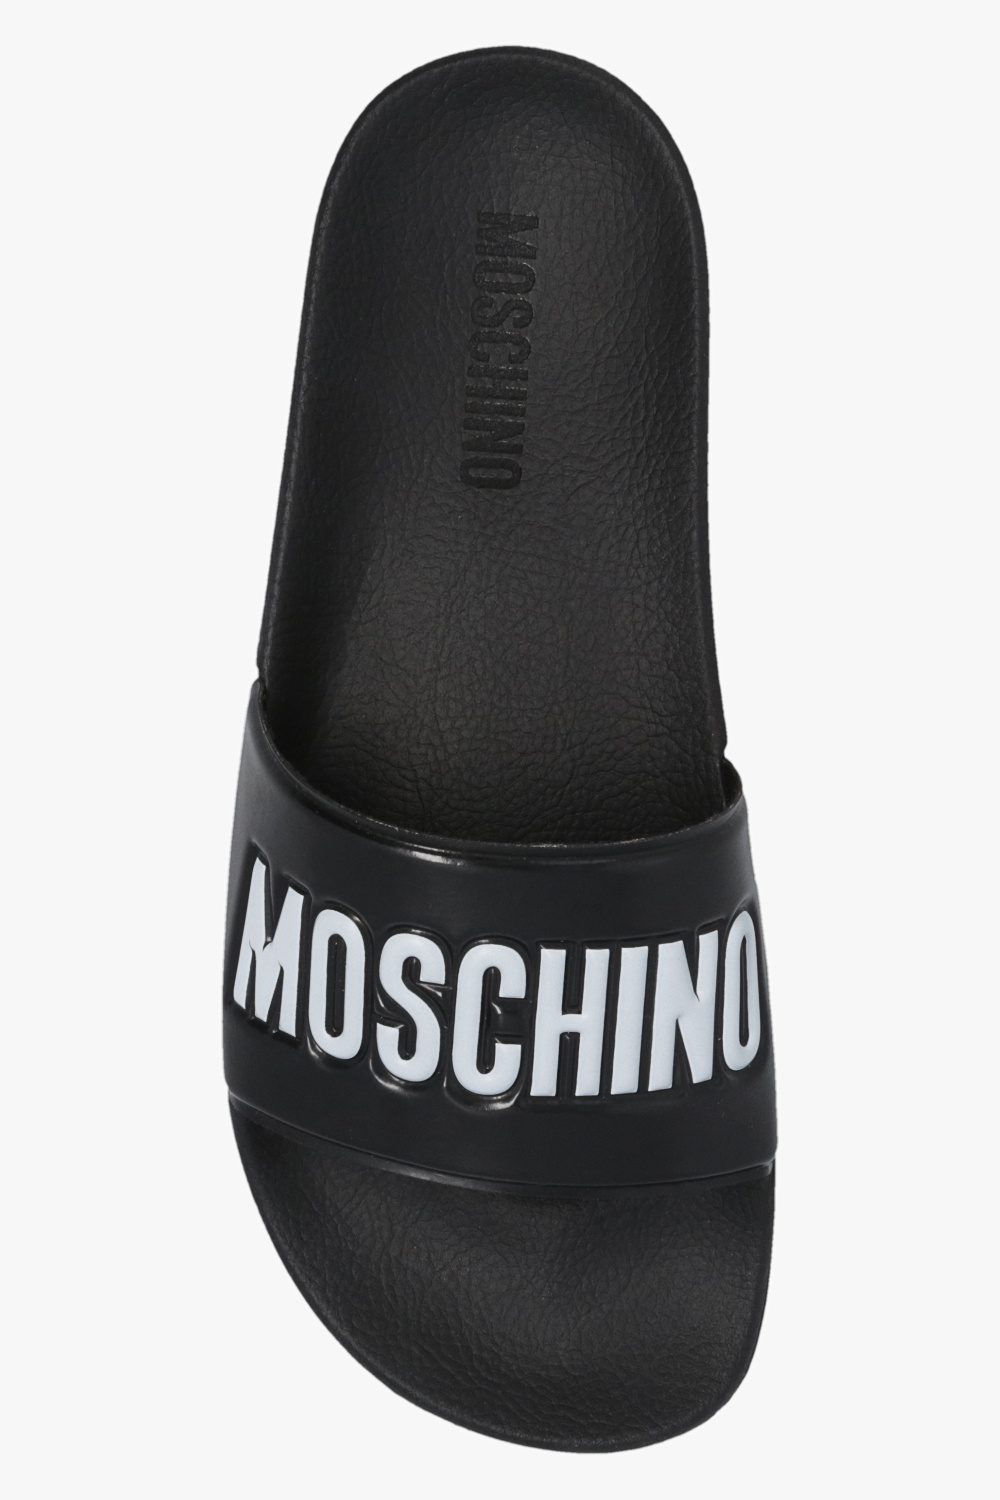 Moschino Paris Texas low-heel leather ankle boots